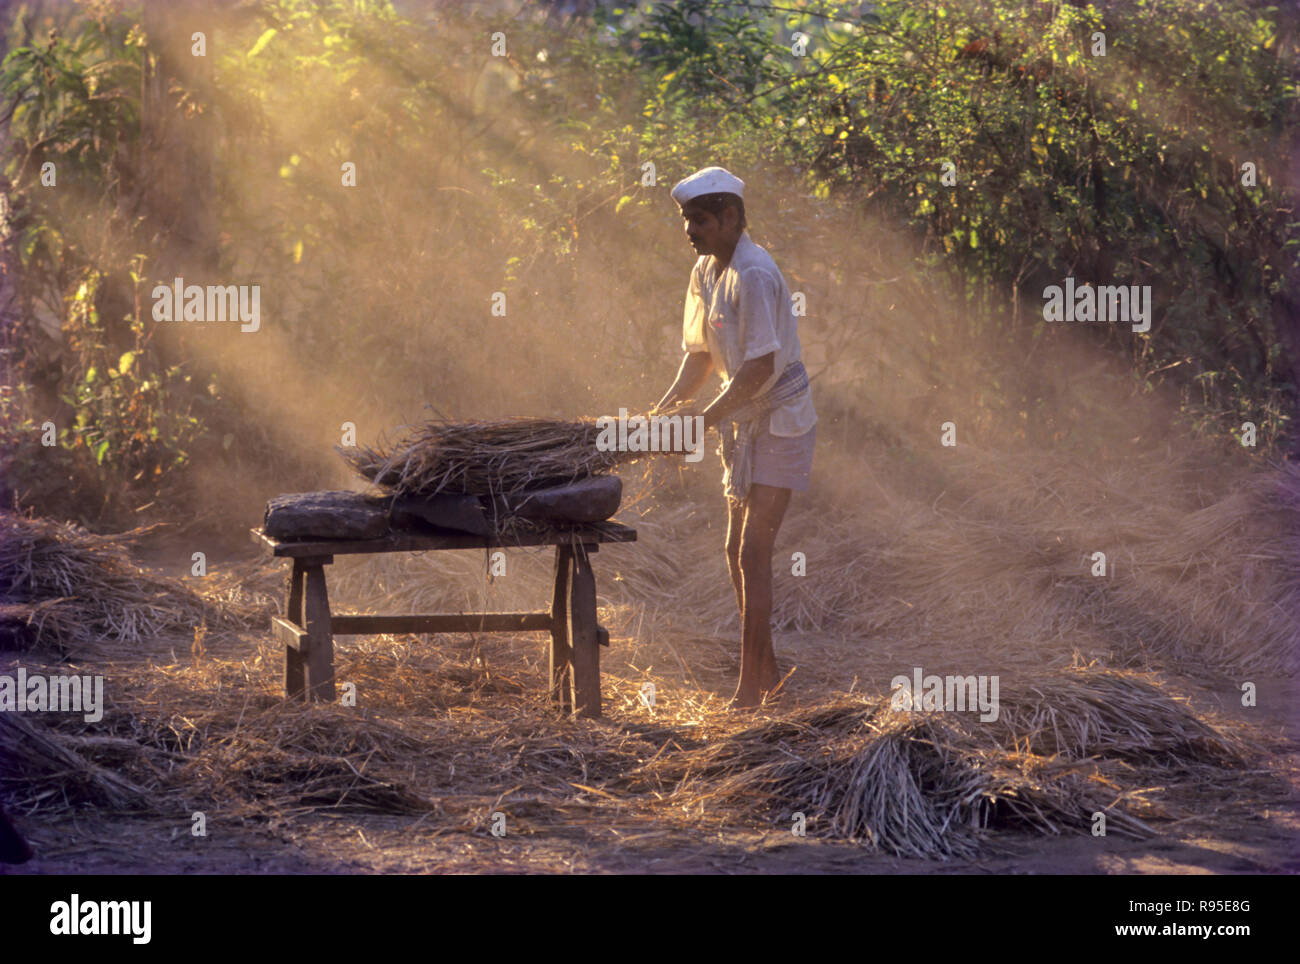 operation of beating out corns, india Stock Photo